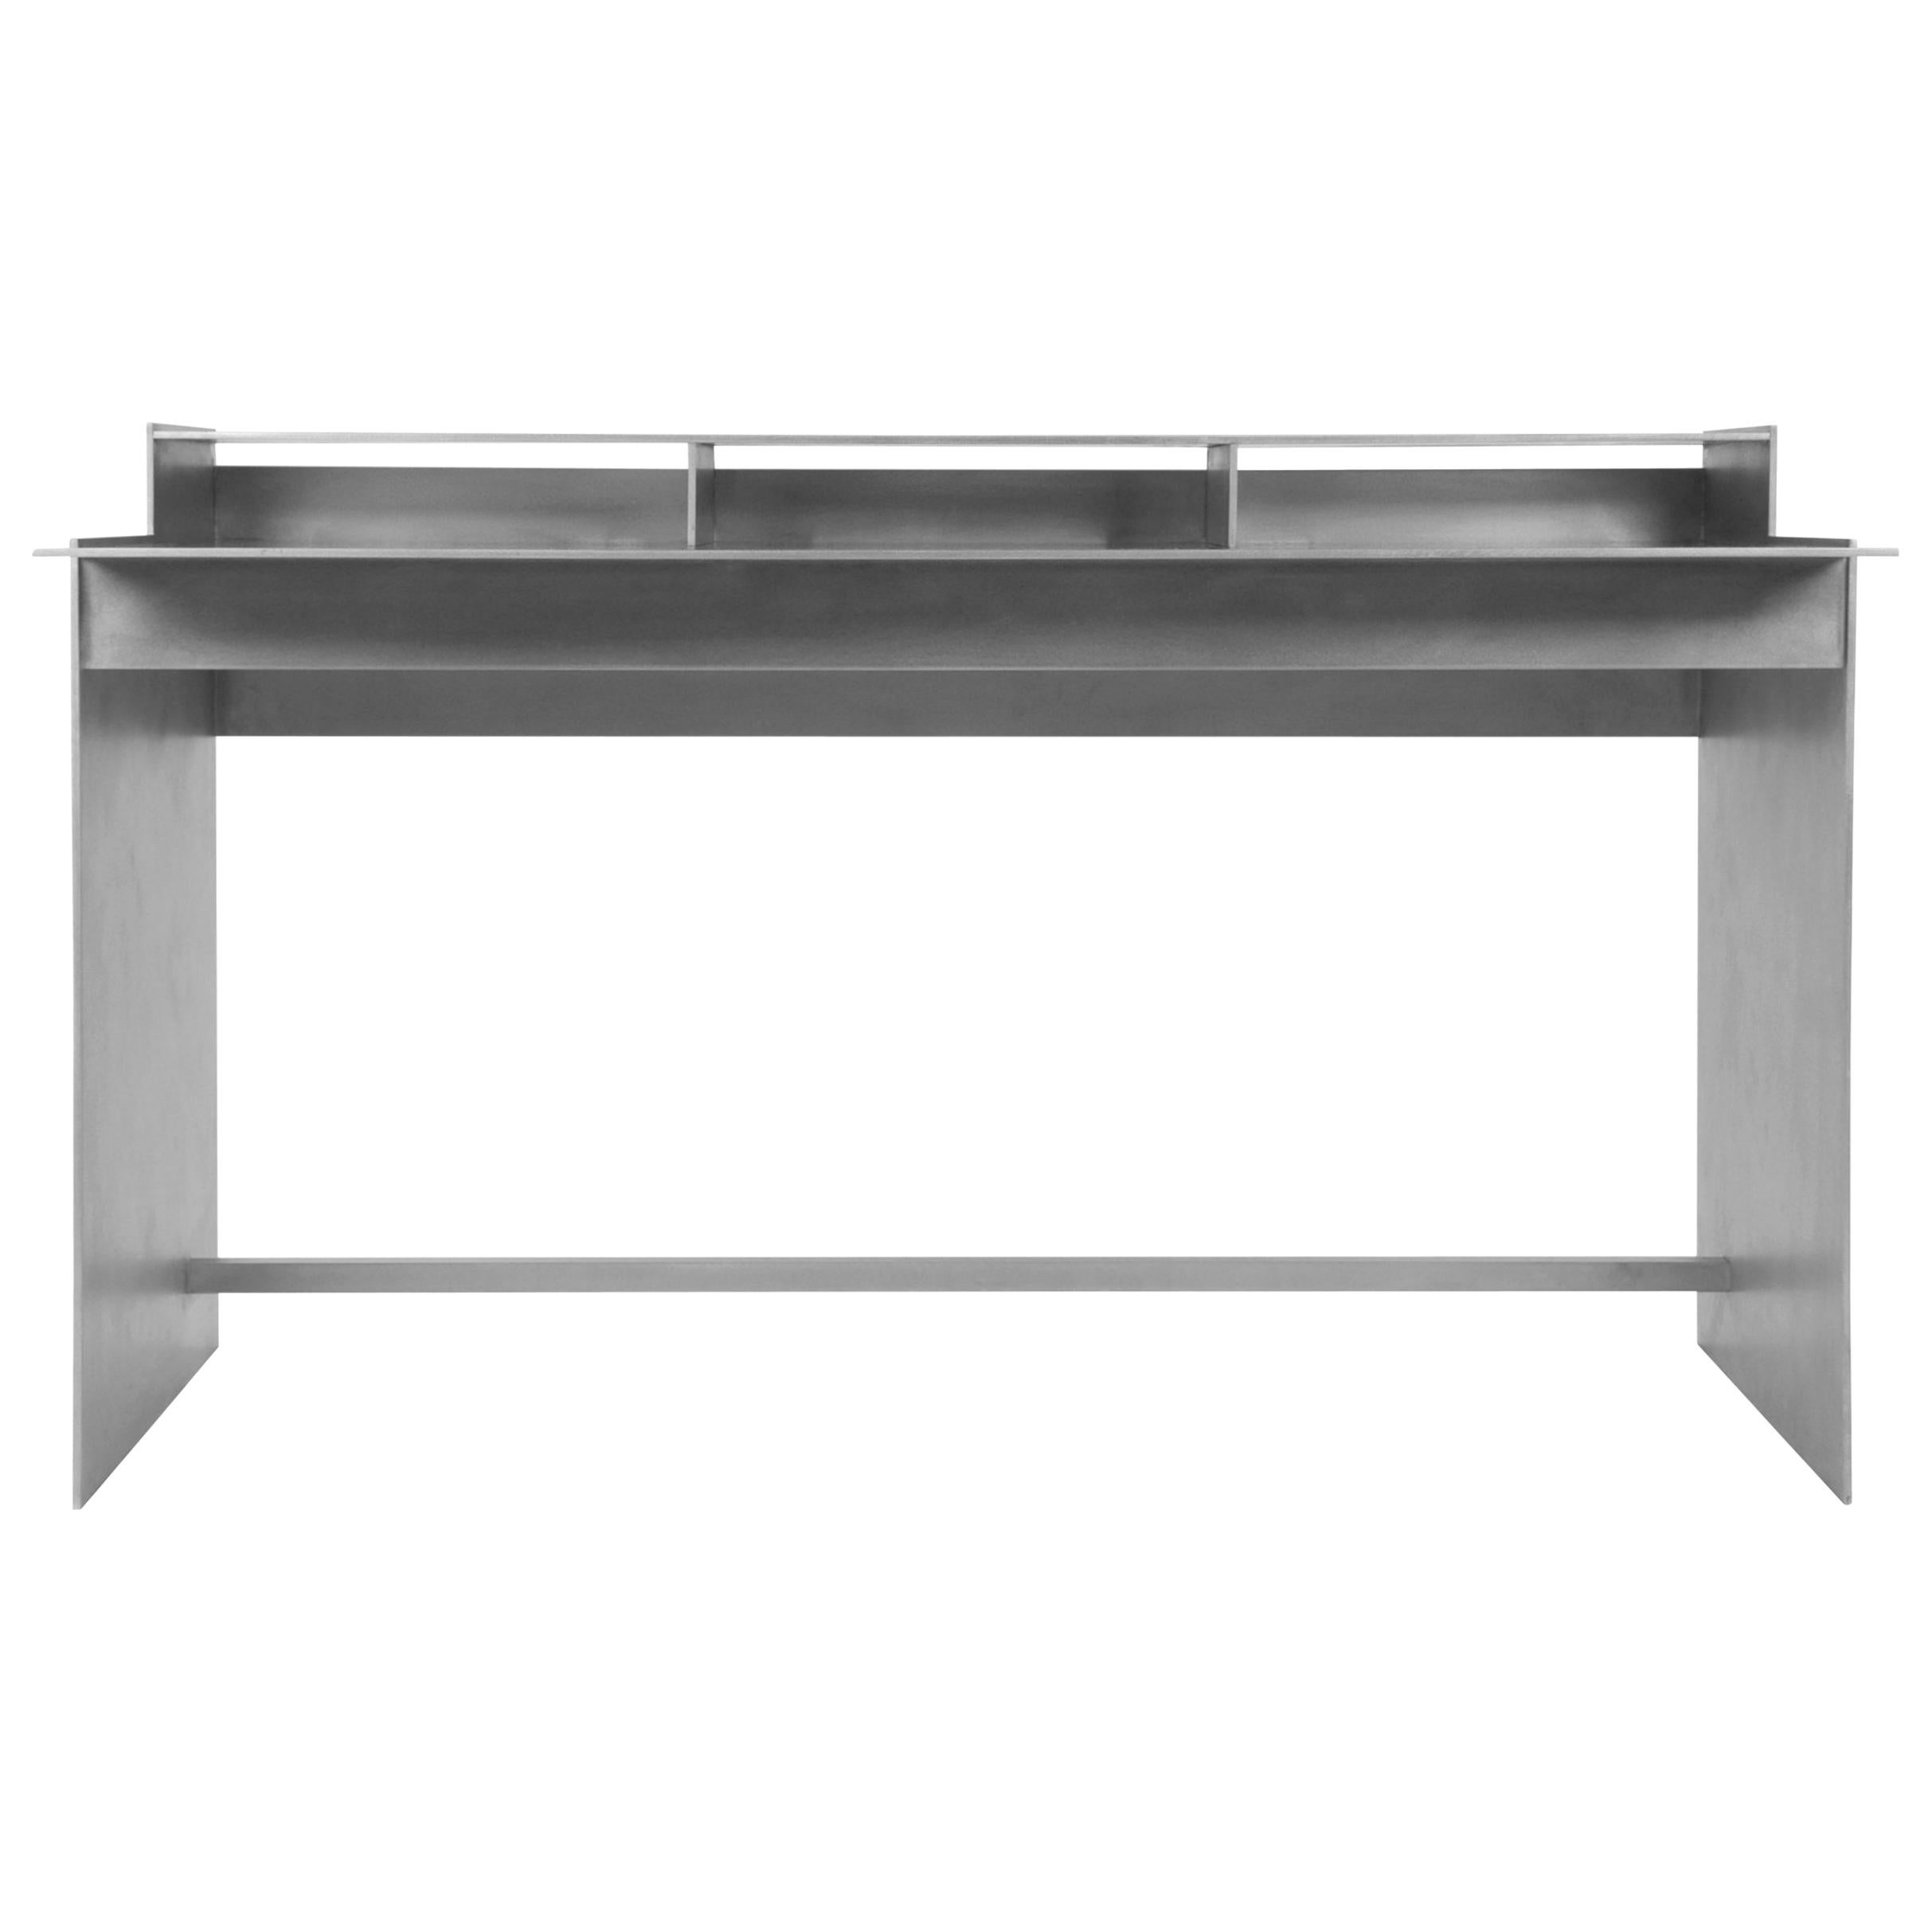 General Desk by Jonathan Nesci in Wax Polished Aluminum Plate For Sale